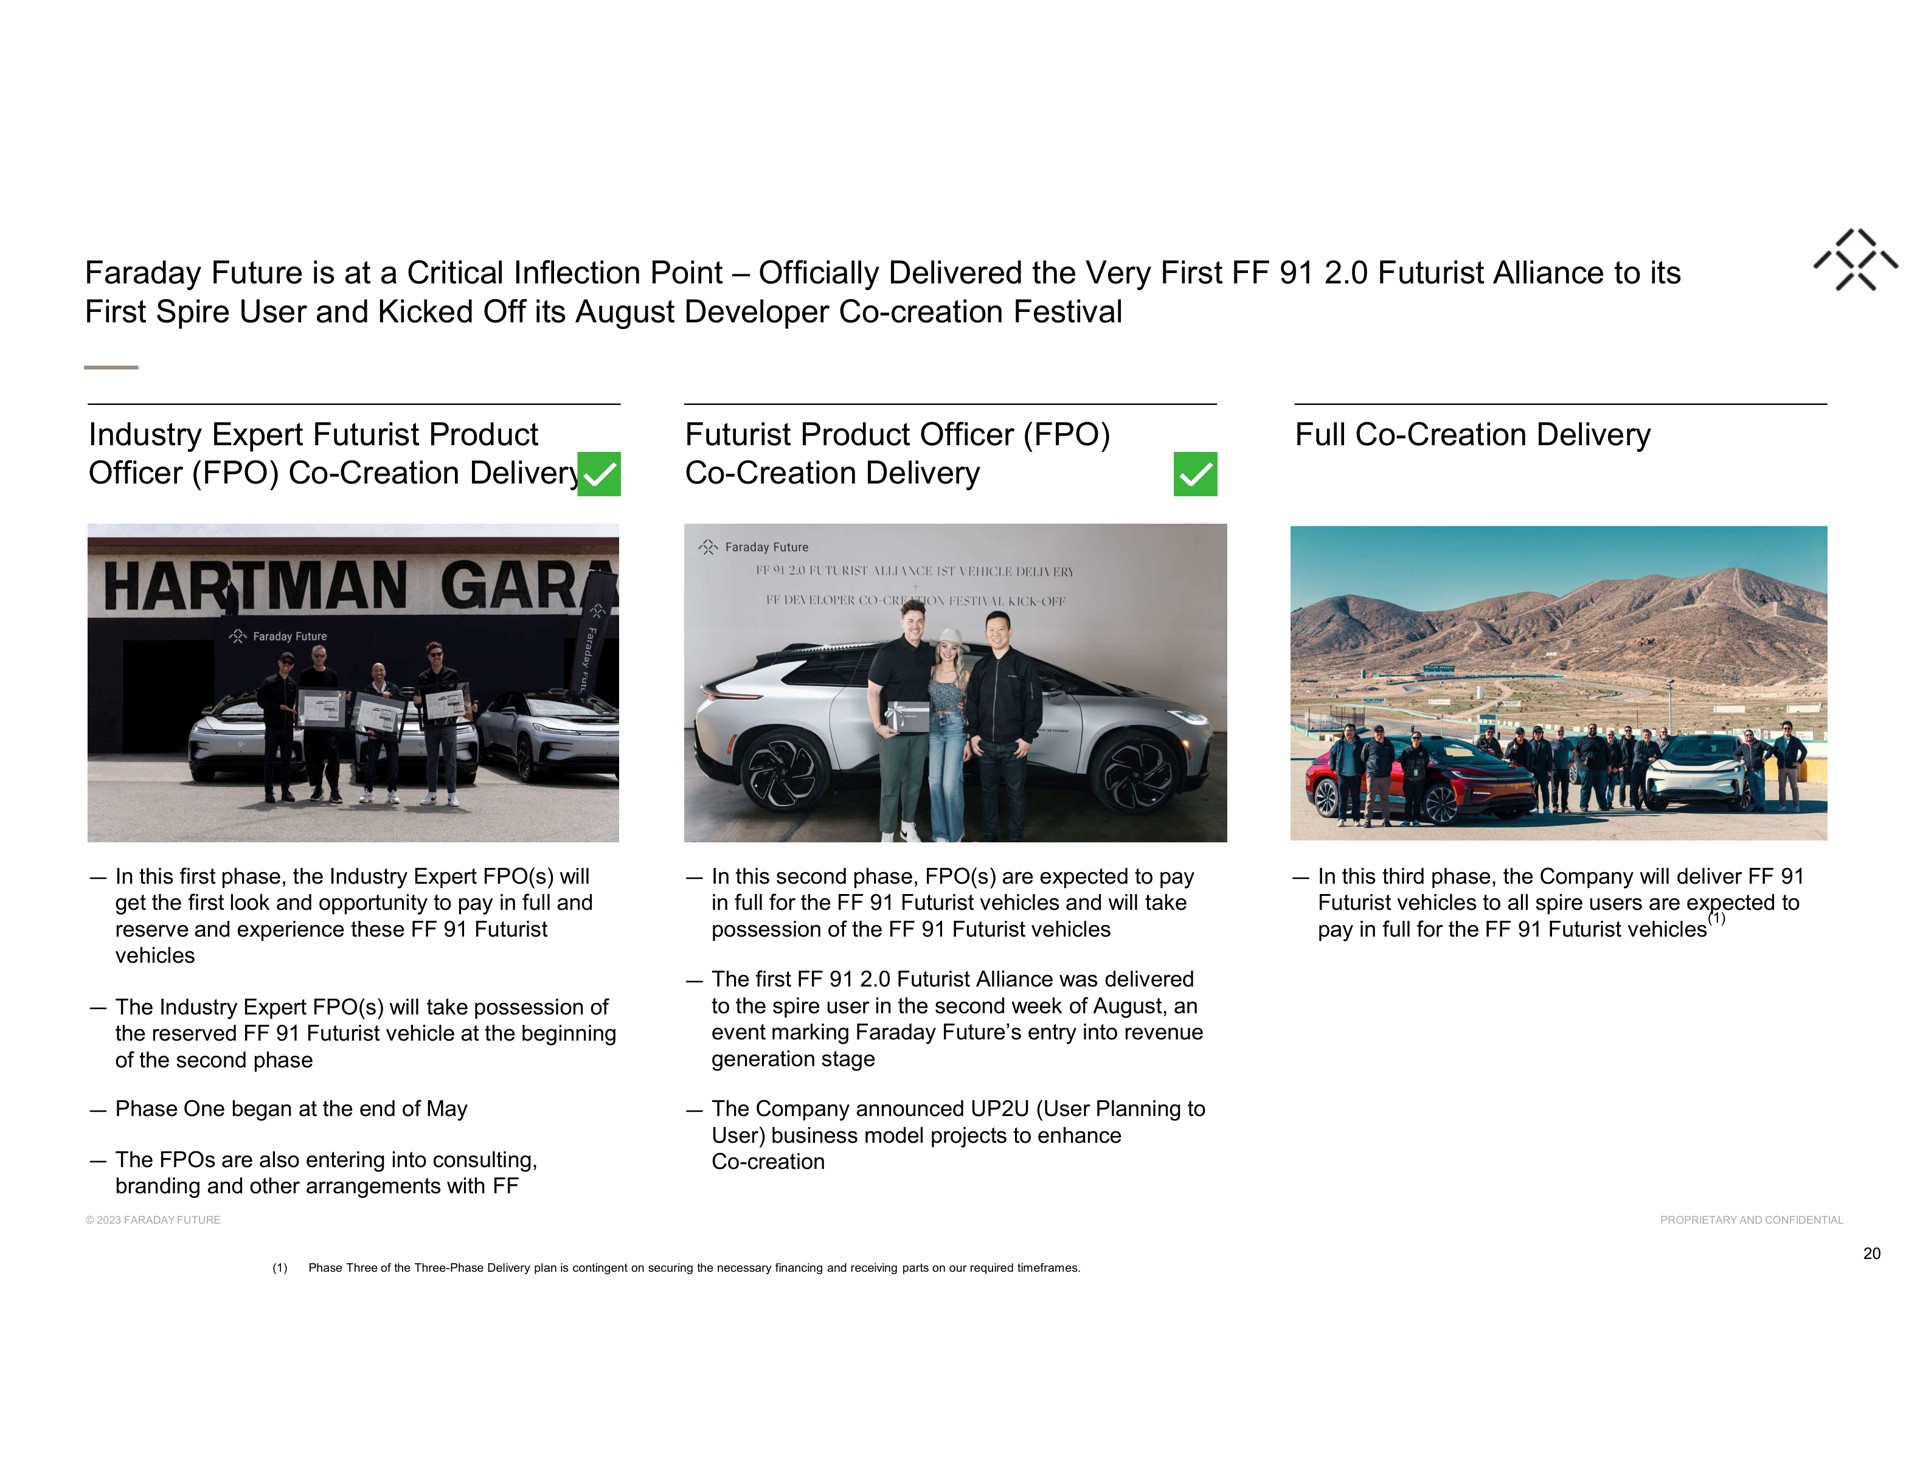 faraday future is at a critical inflection point officially delivered the very first futurist alliance to its first spire user and kicked off its august developer creation festival industry expert futurist product officer creation delivery futurist product officer creation delivery full creation delivery pay in for vehicles | Faraday Future